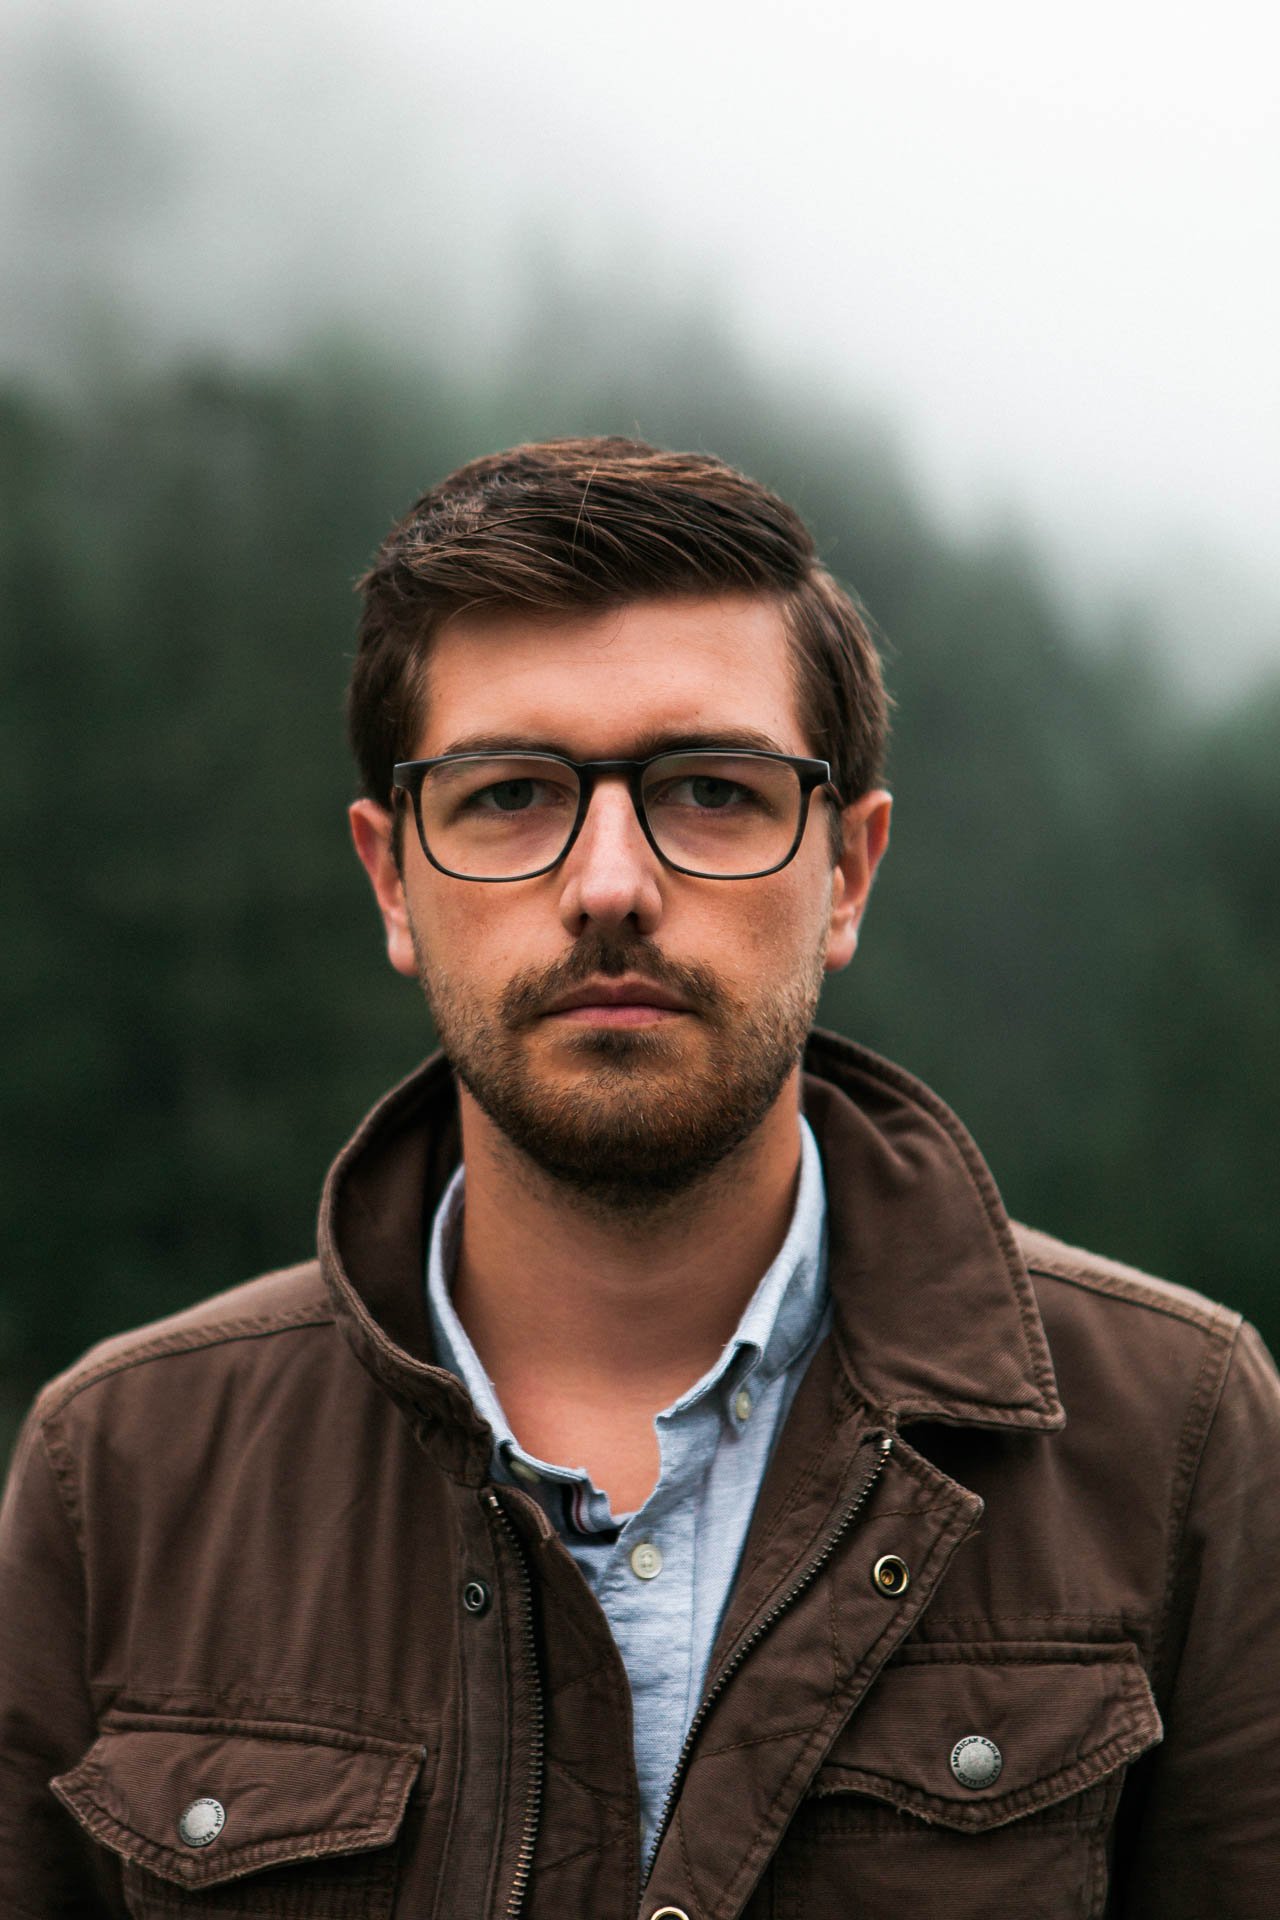 Jonathan-Grado-with-Warby-Parker-Glasses.jpg